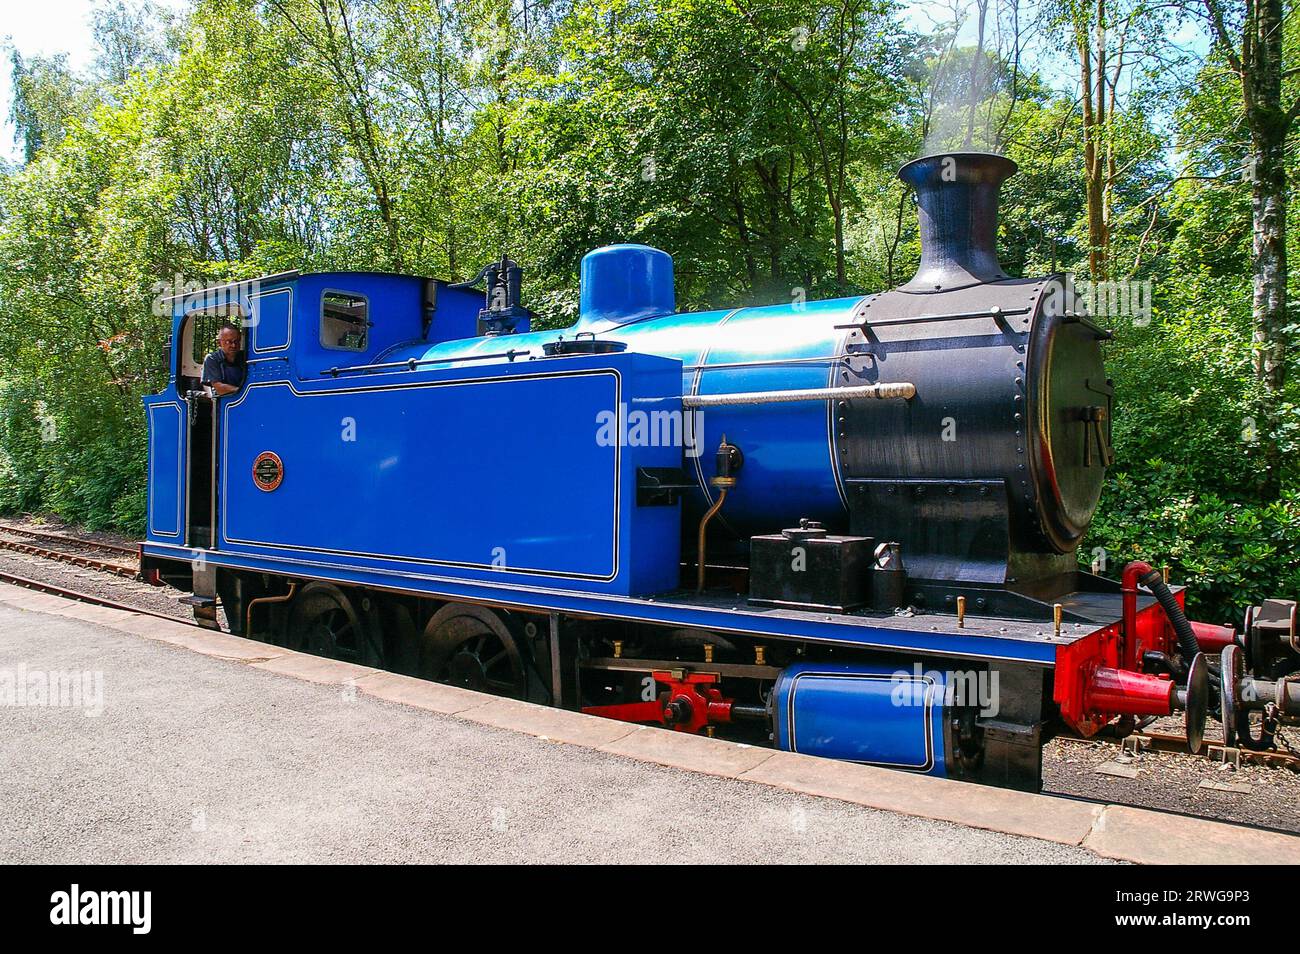 Andrew Barclay Sons 0-6-0T steam locomotive number 1245 at Lakeside station, Lakeside & Haverthwaite Railway, Cumbria, UK. Built 1911. Restored 2004 Stock Photo